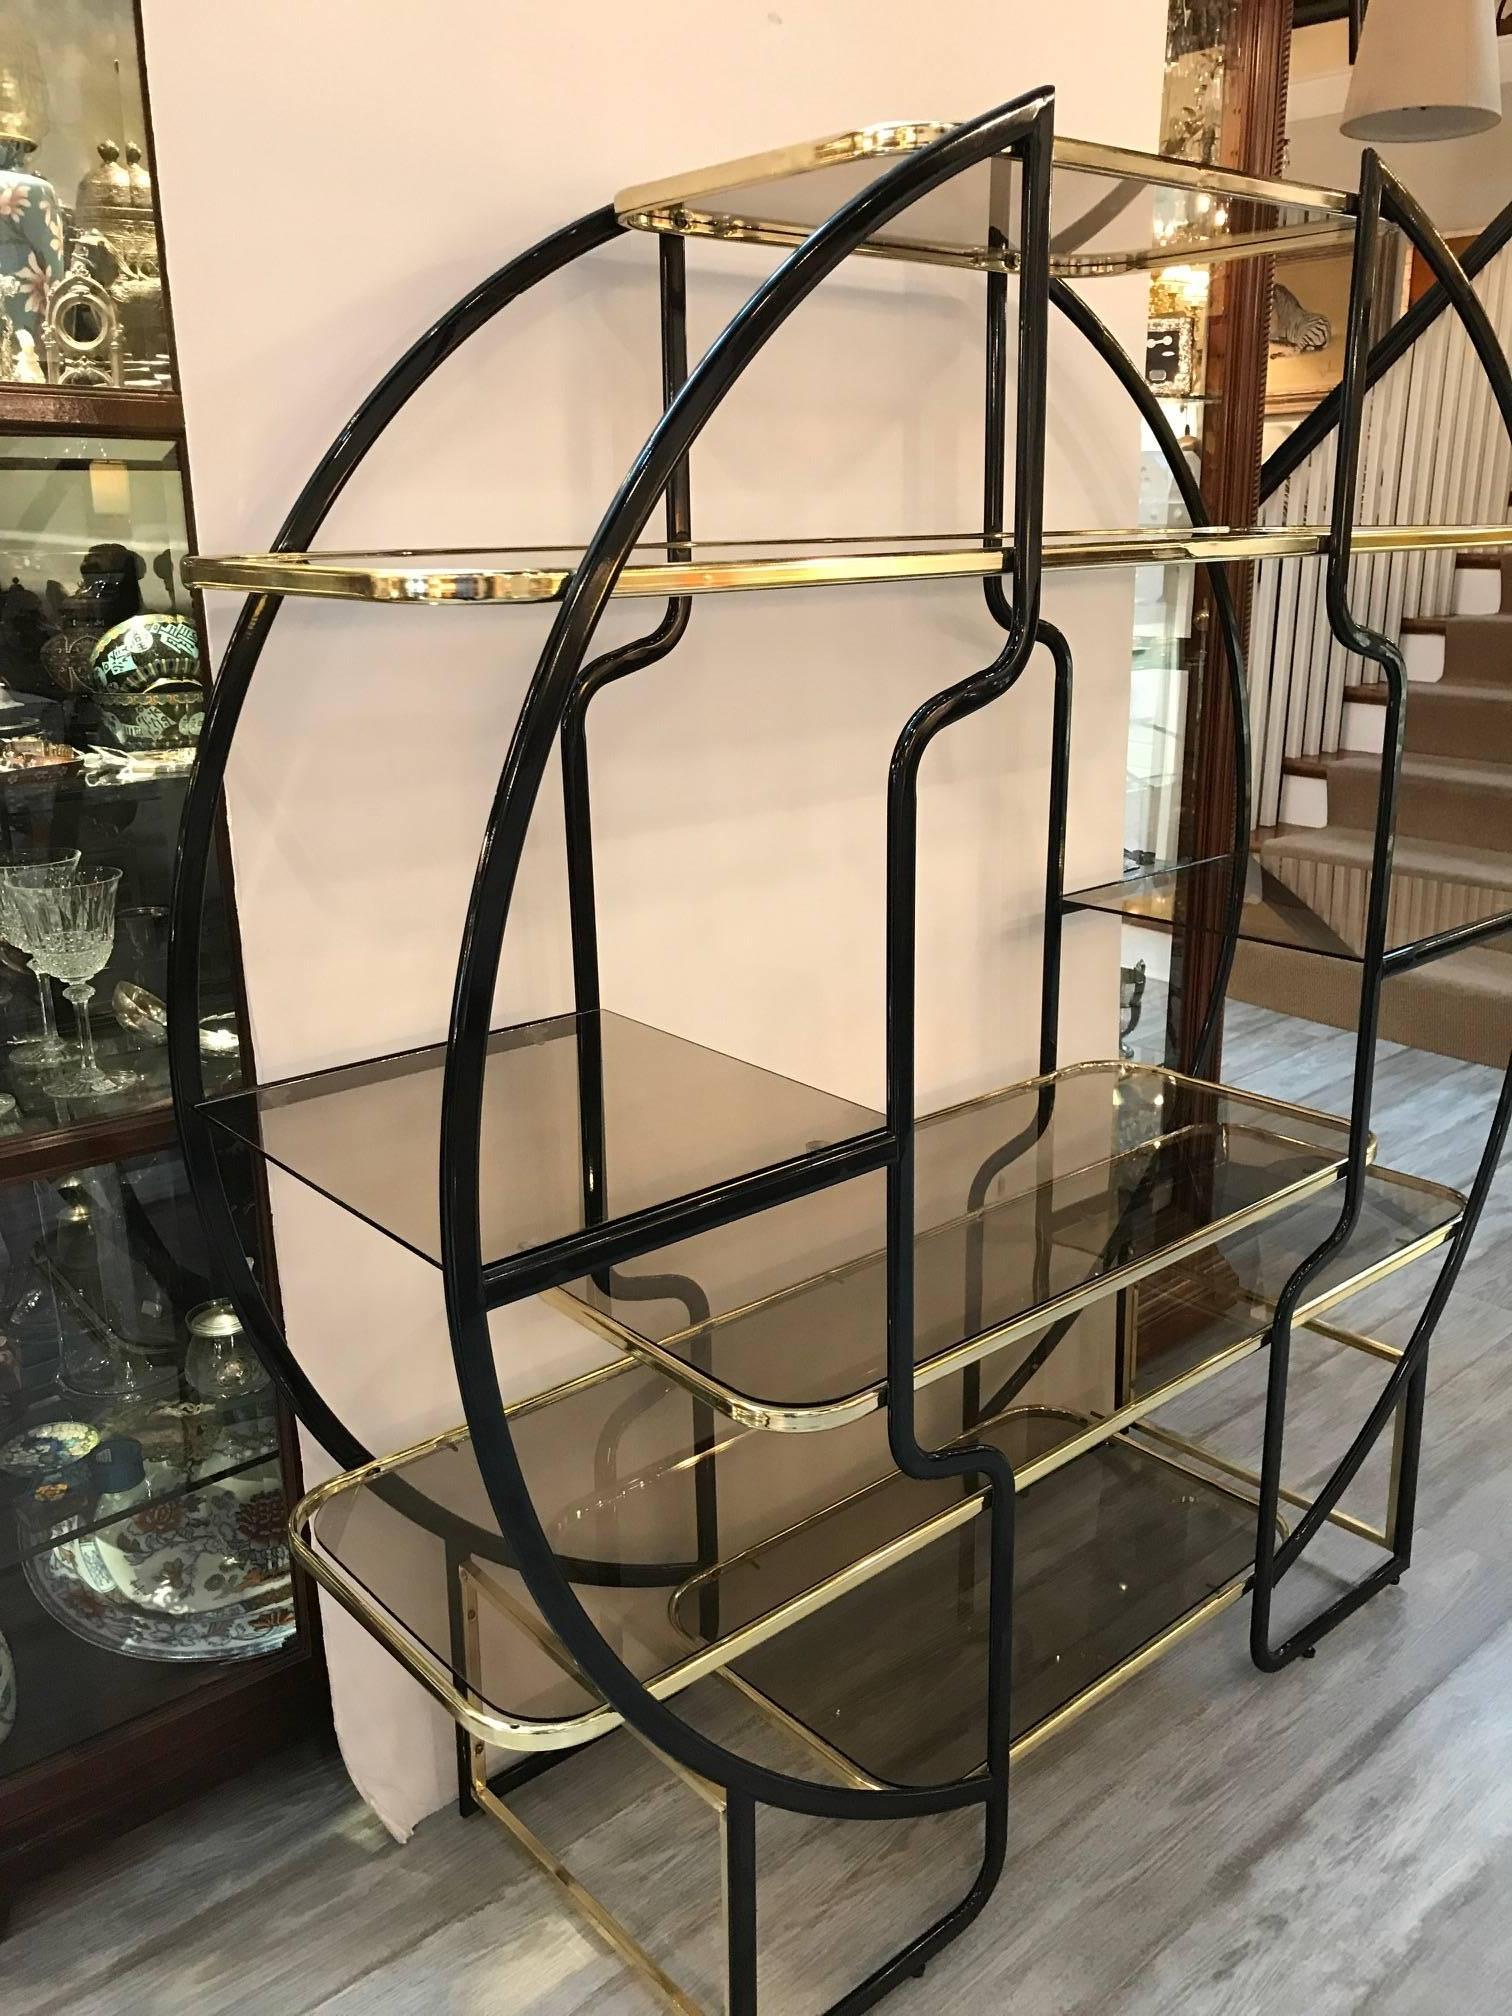 High style black enamel and brass étagère with light smoked glass shelves. Great display with lots of shelves, in the manner of Pierre Cardin.